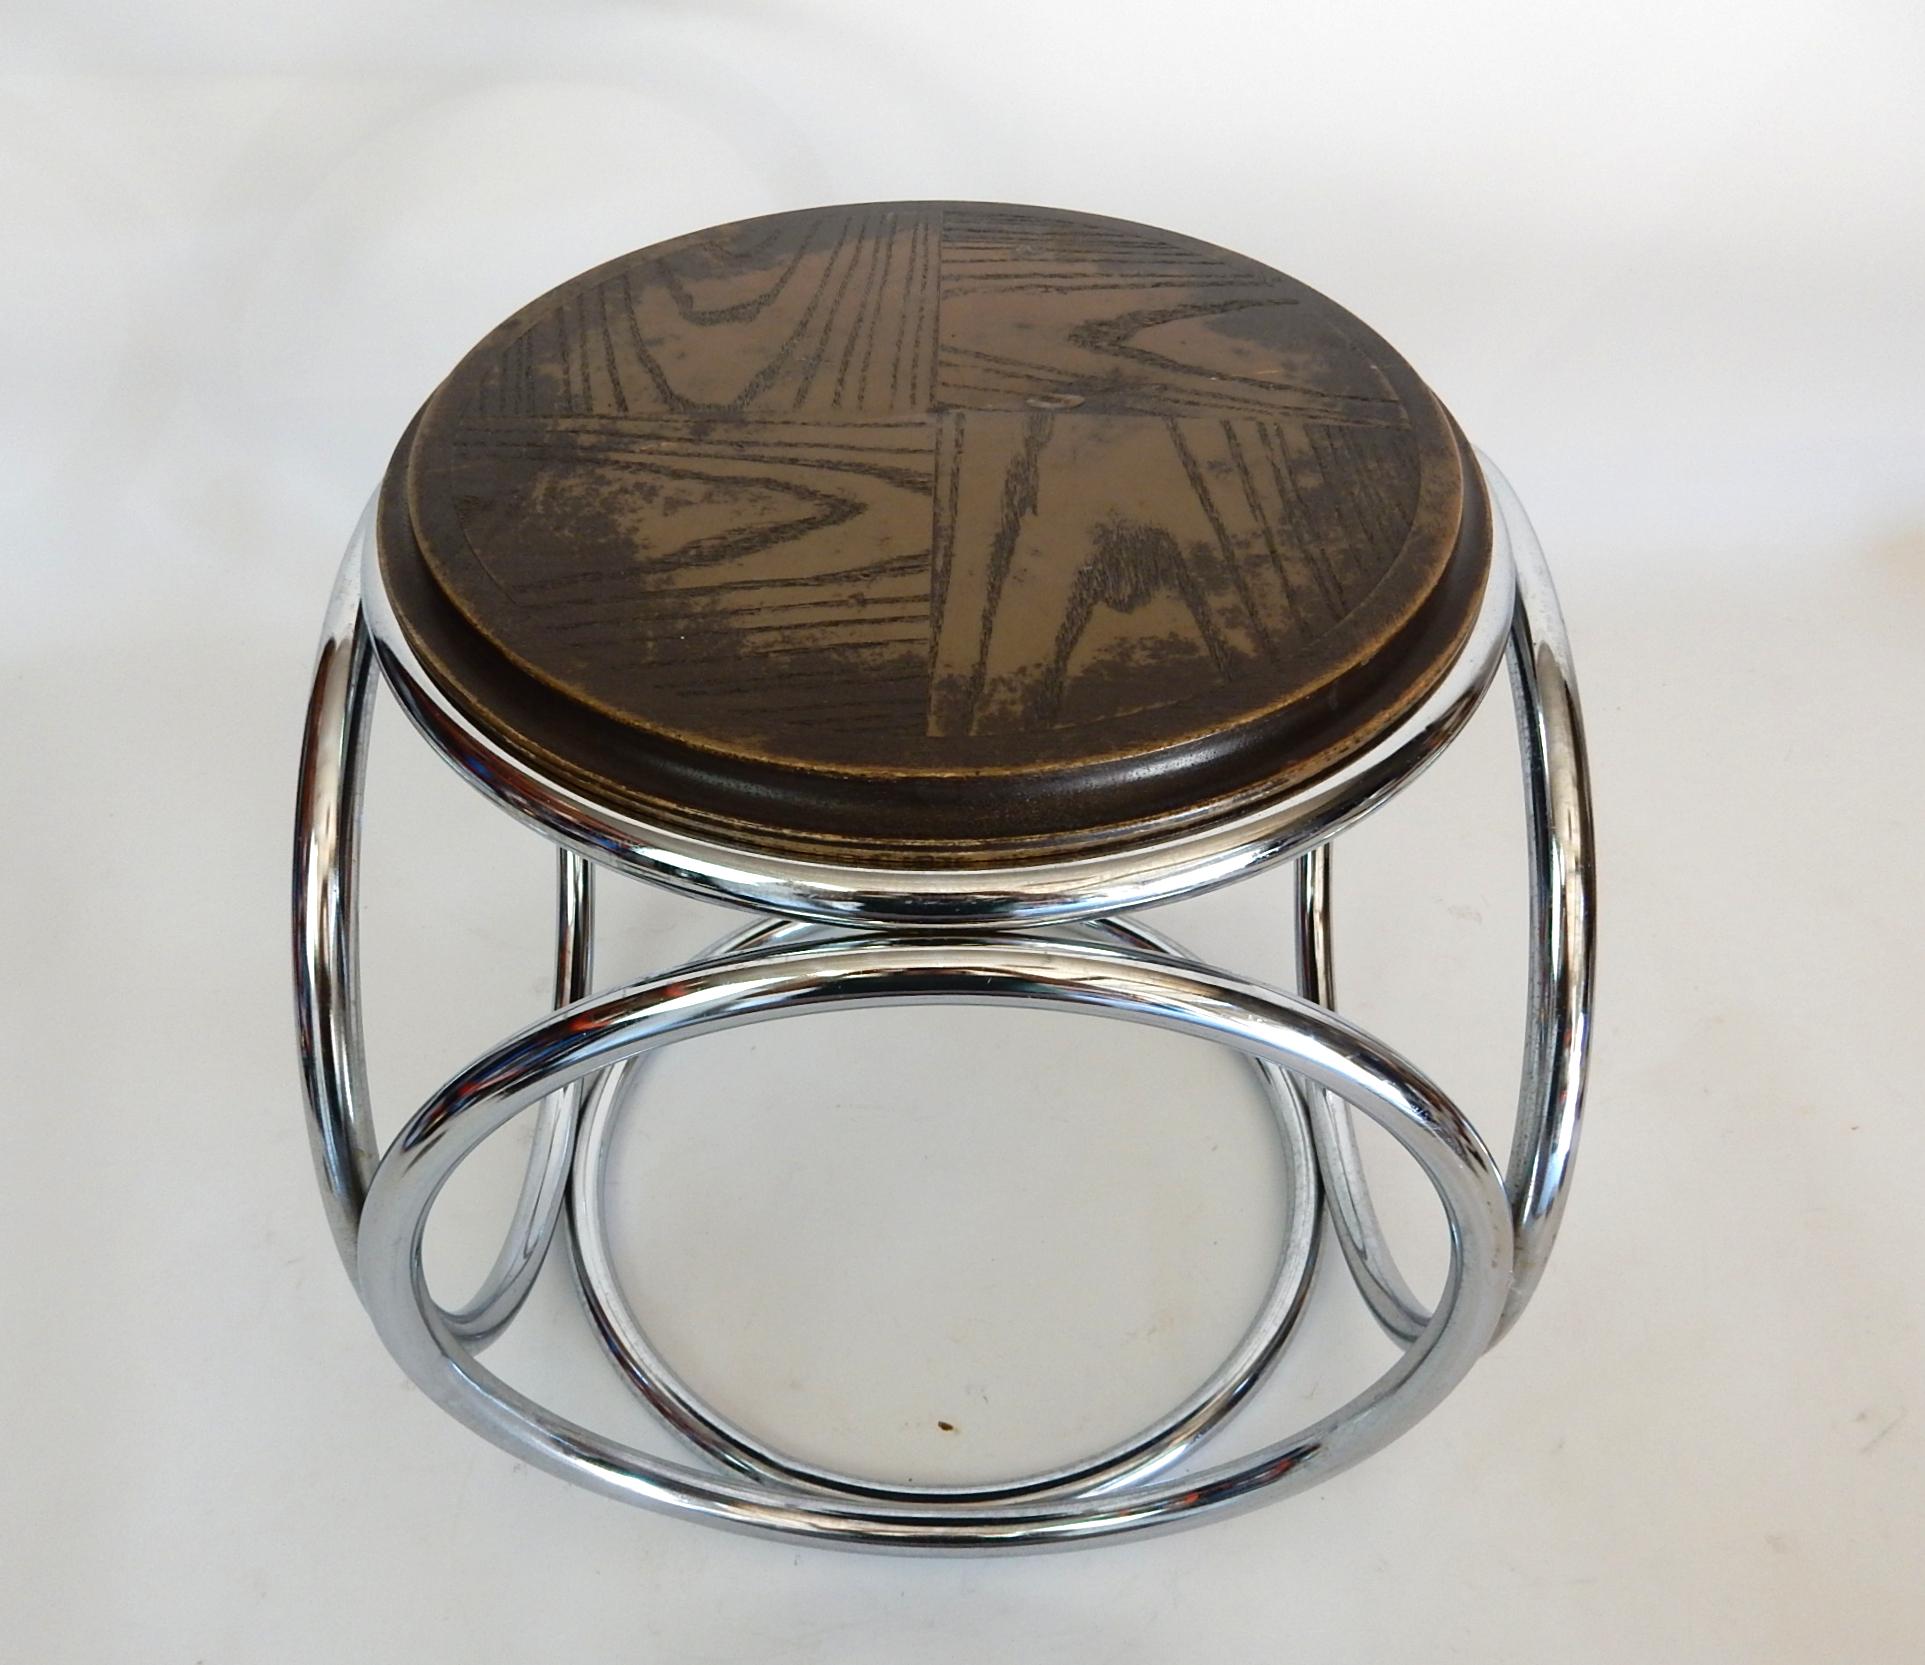 French Art Deco Jean-Pierre Laporte Design Tubular Circle Stool or Table In Good Condition For Sale In Las Vegas, NV